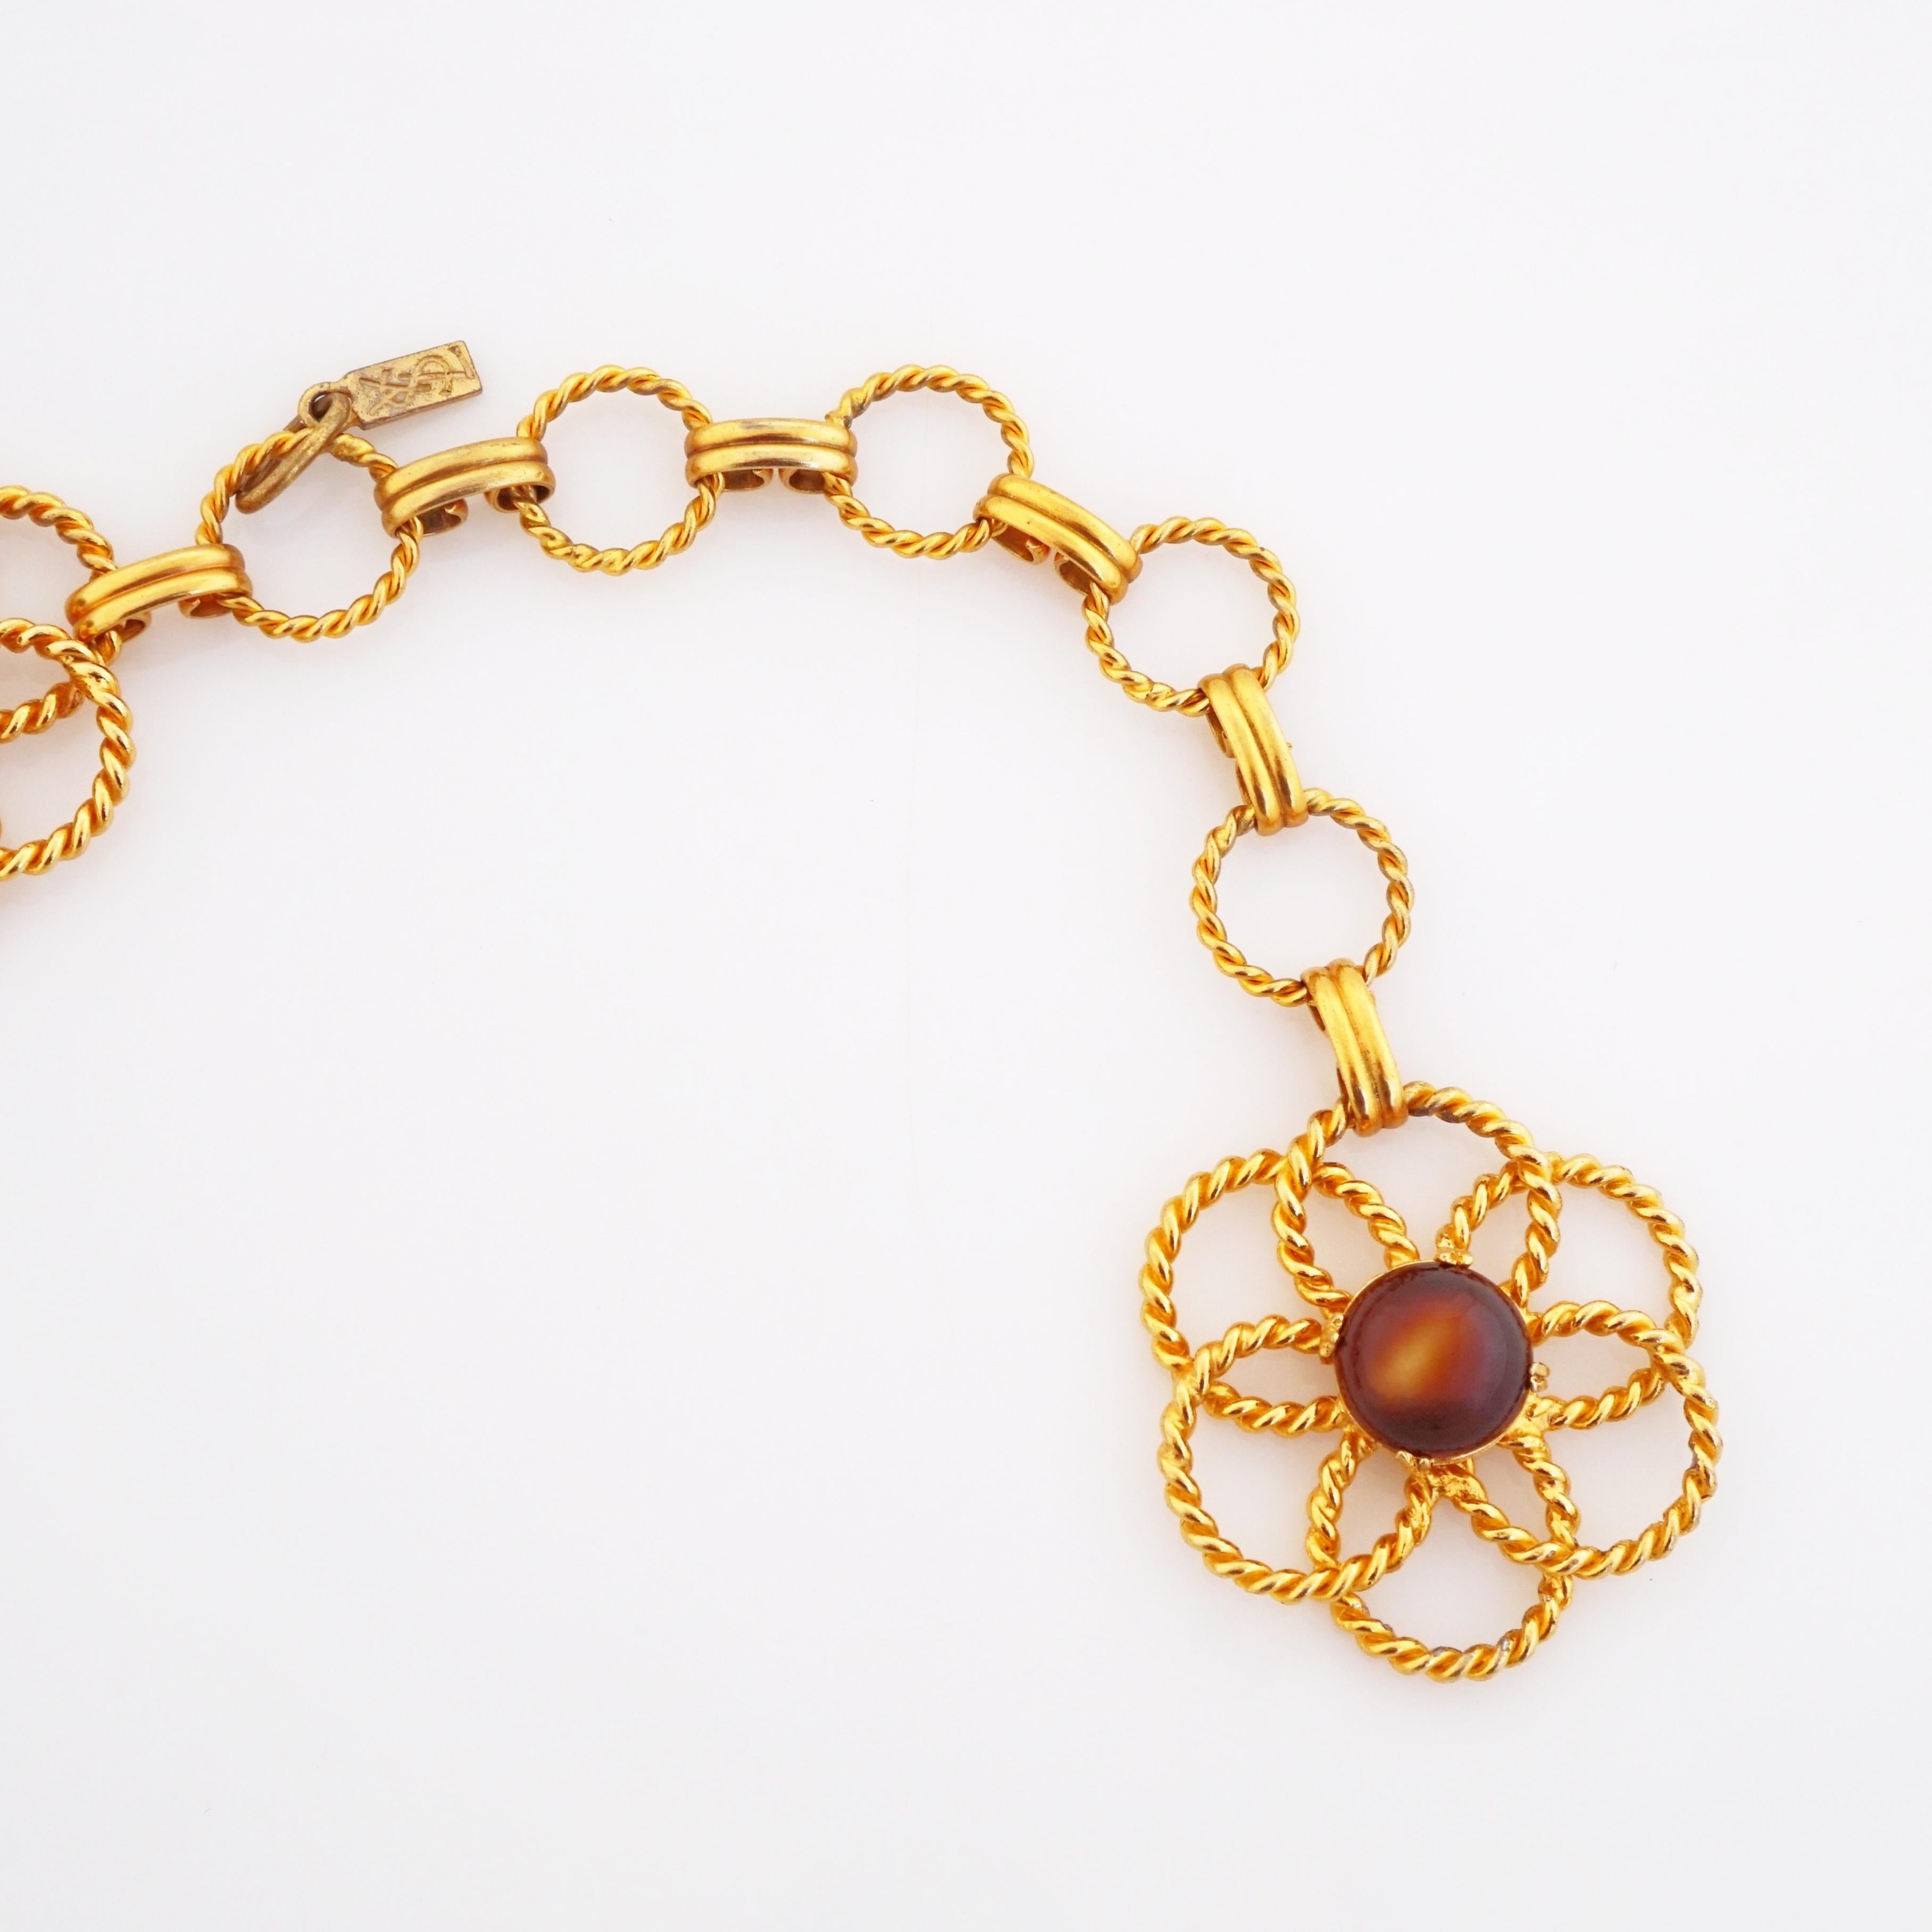 Orange Gilded Flower Link Chain Belt By Roger Scemama for YSL, 1960s For Sale